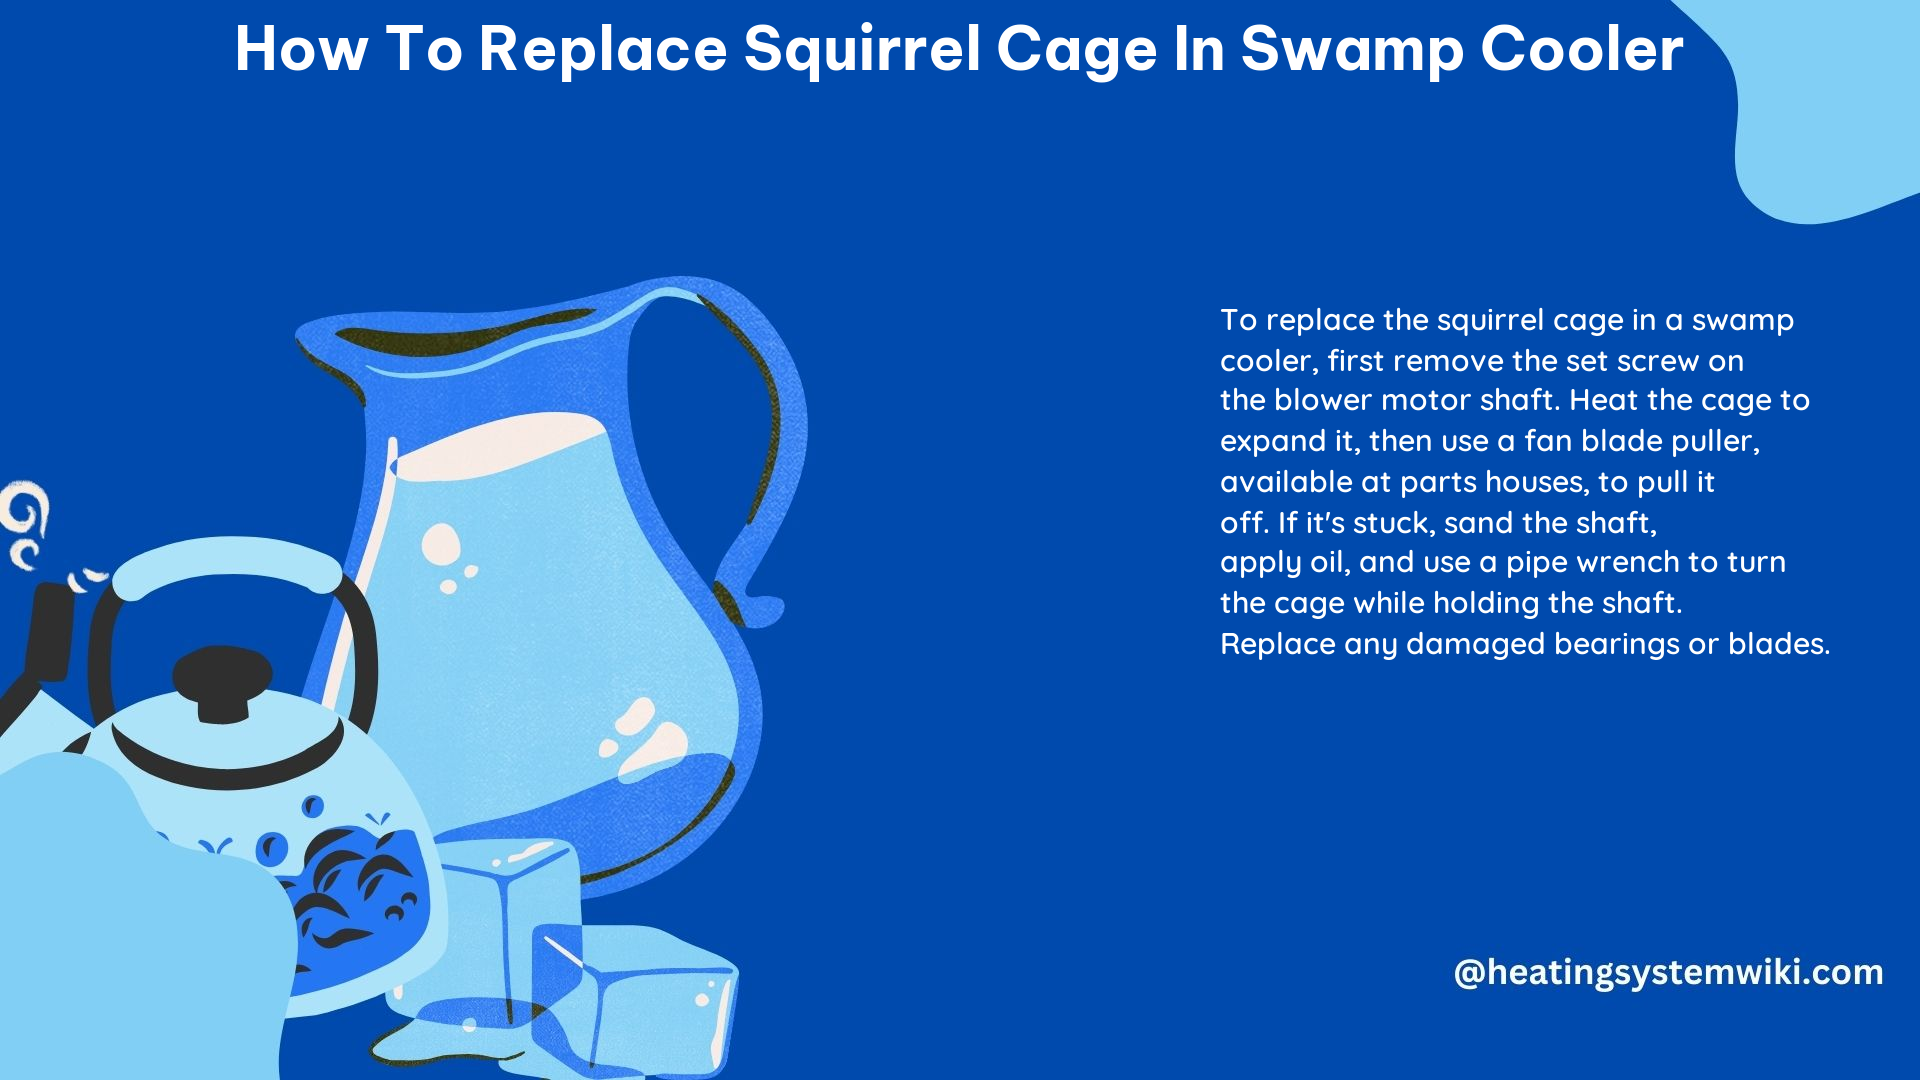 How to Replace Squirrel Cage in Swamp Cooler